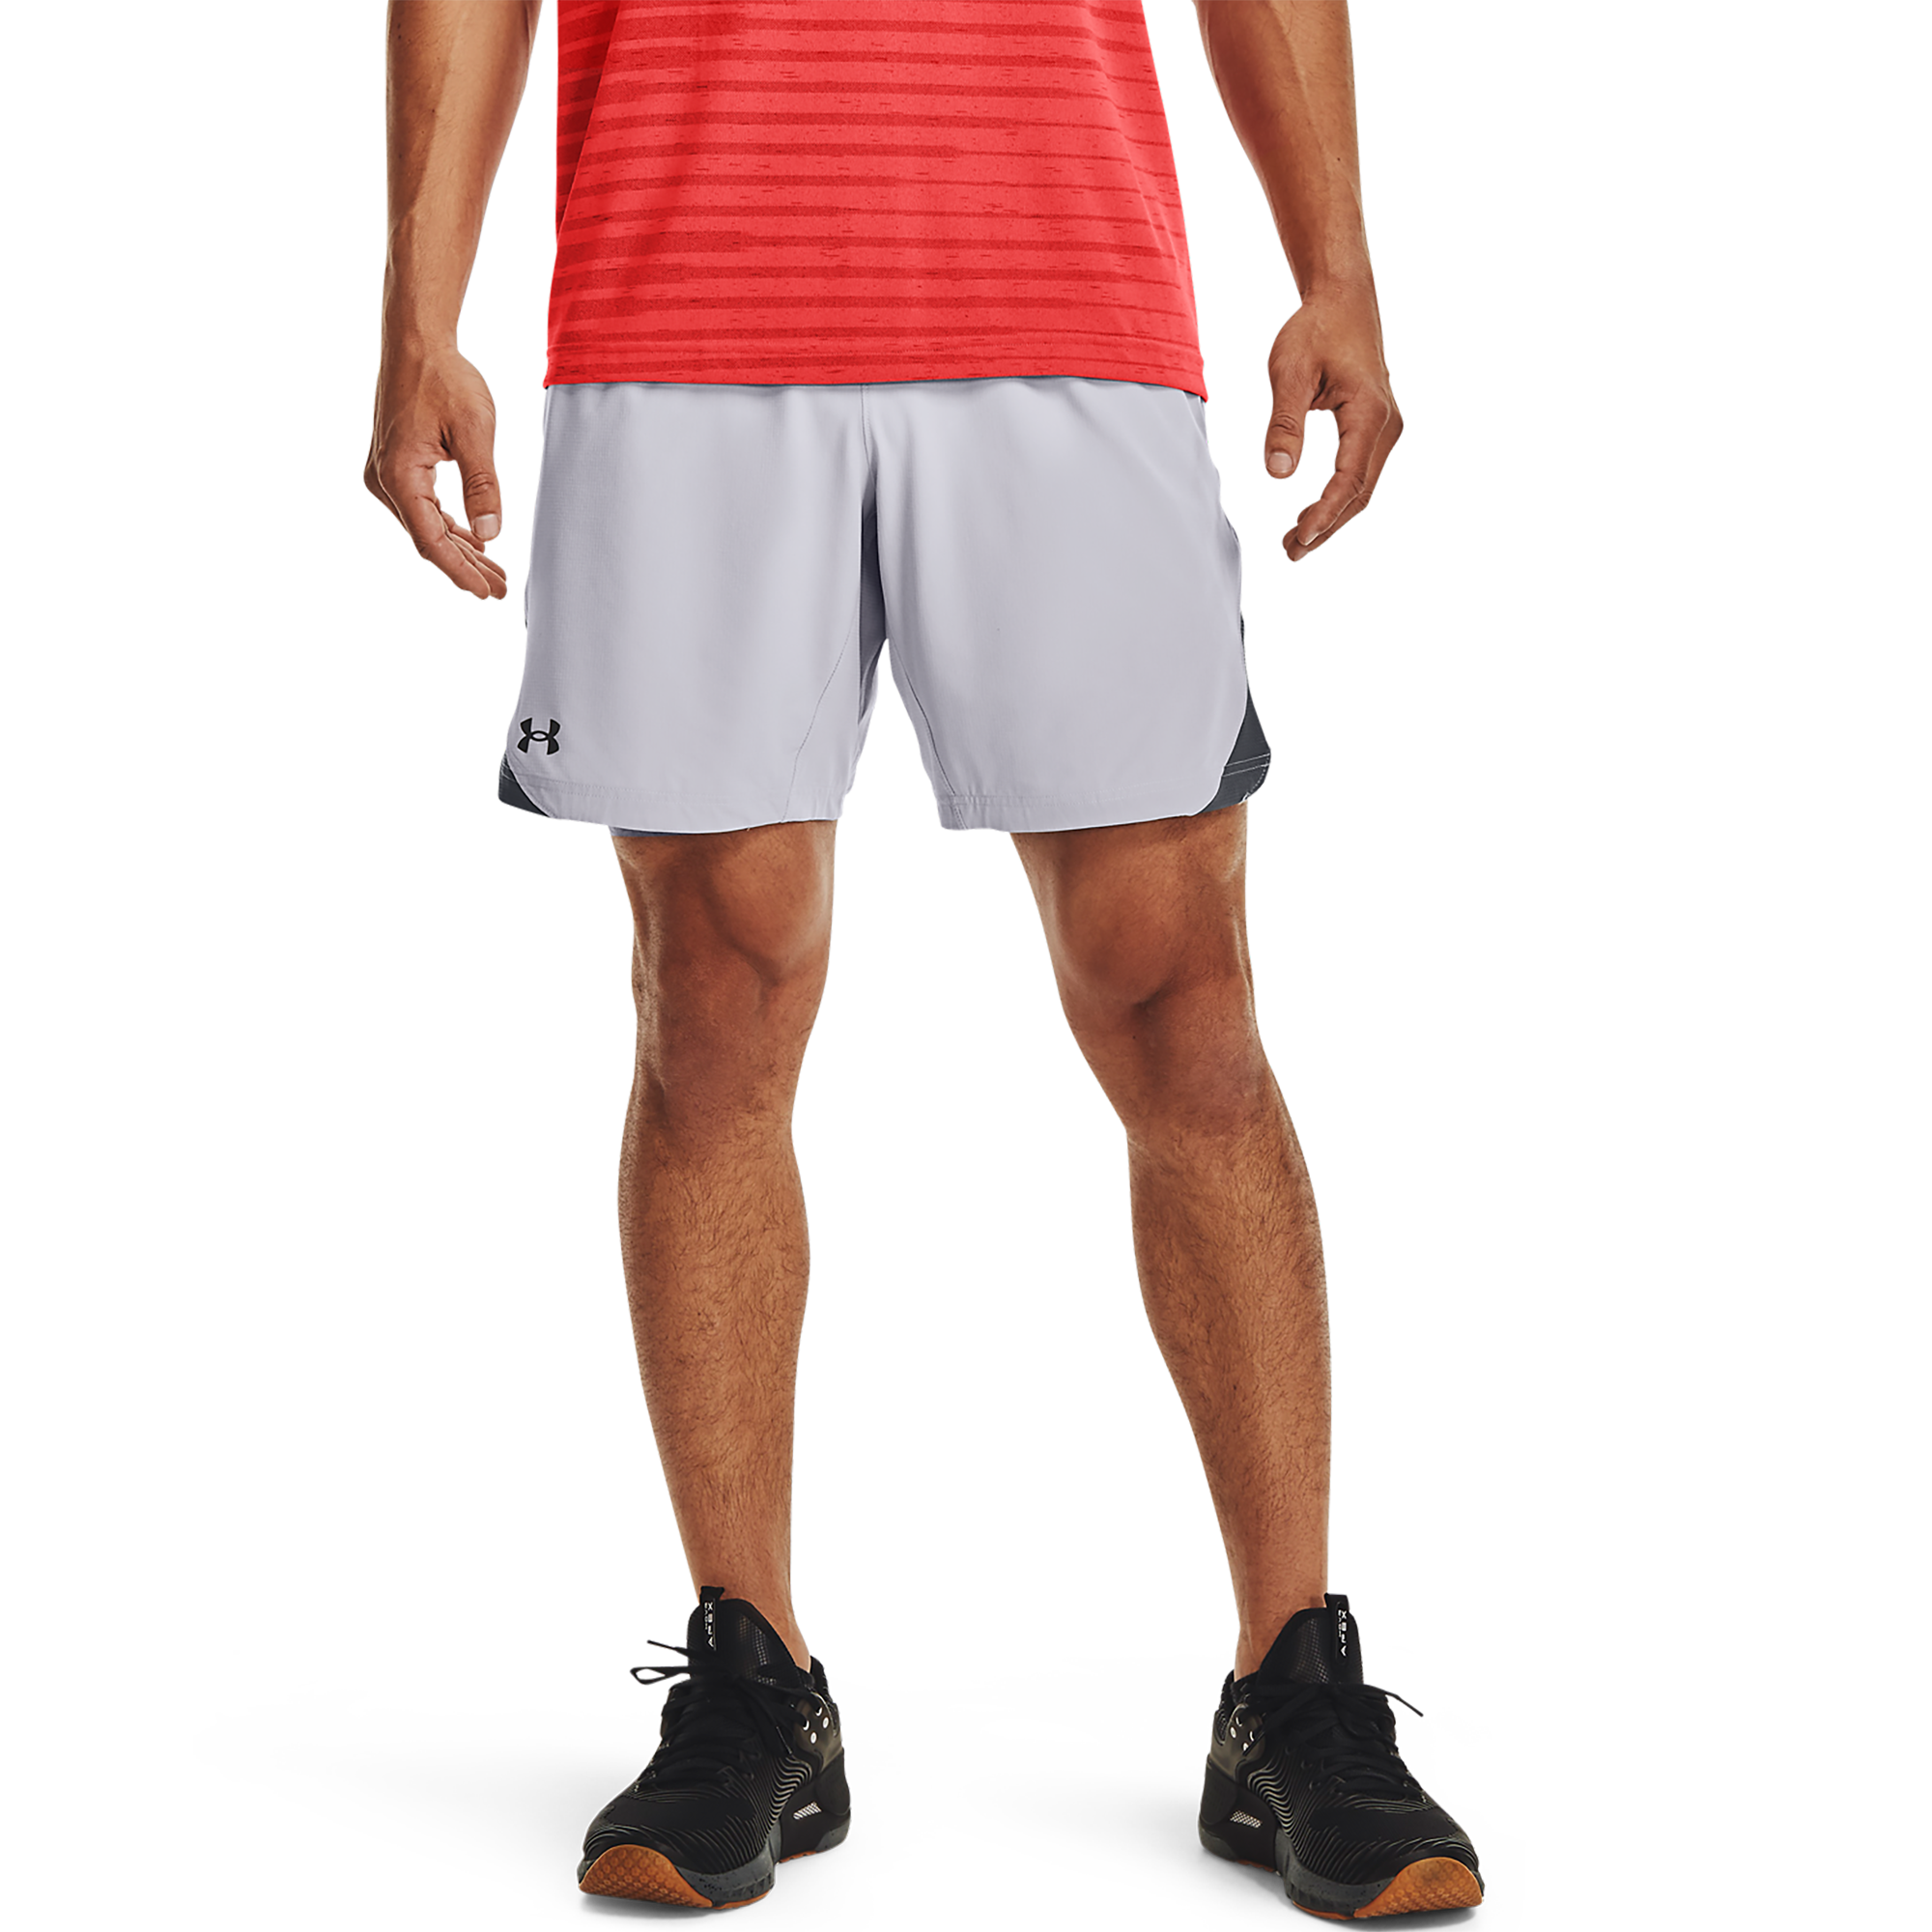 Under Armour Men's Elevated Woven Shorts with Pockets 1362289 013 Grey Size  L